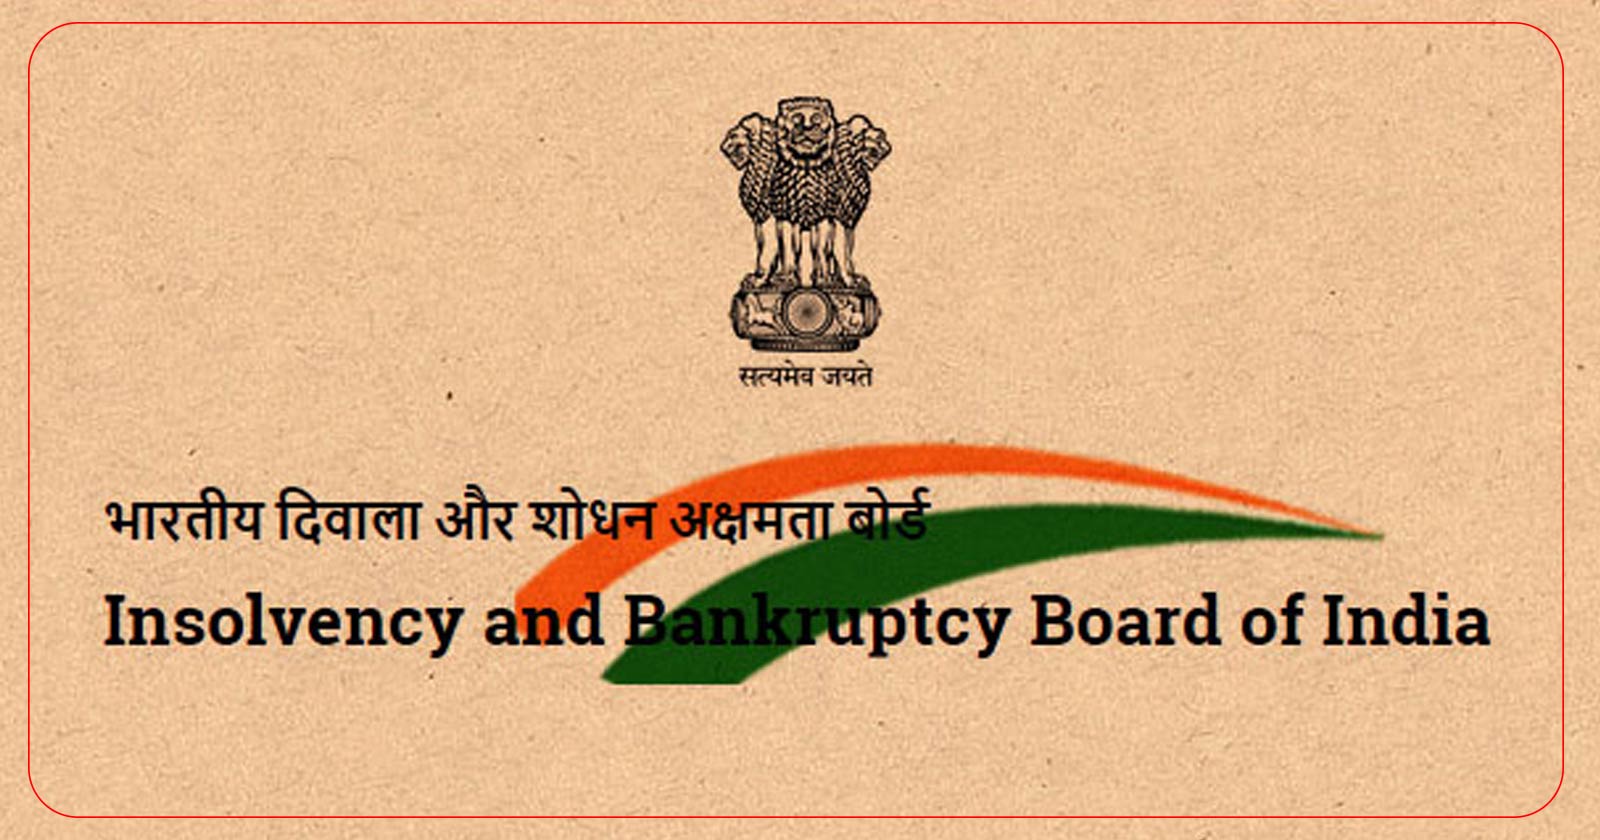 IBBI - Insolvency and Bankruptcy Board of India - Financial Service Provider - Voluntary Liquidation - Taxscan